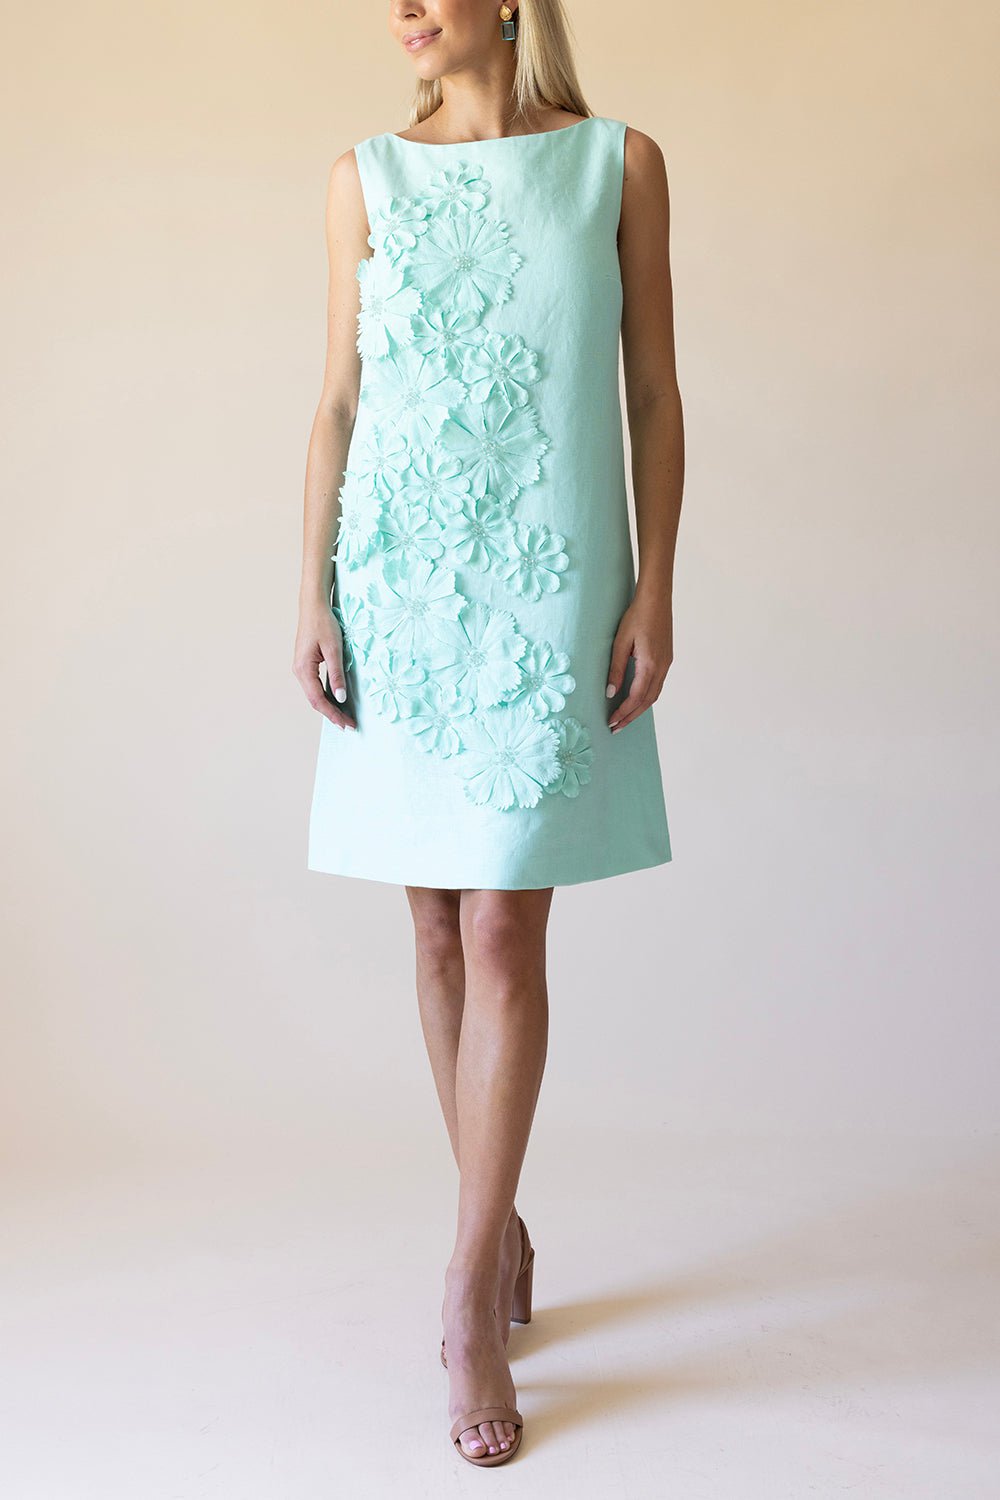 CATHERINE REGEHR-Sleeveless Floral Embroidered Dress-